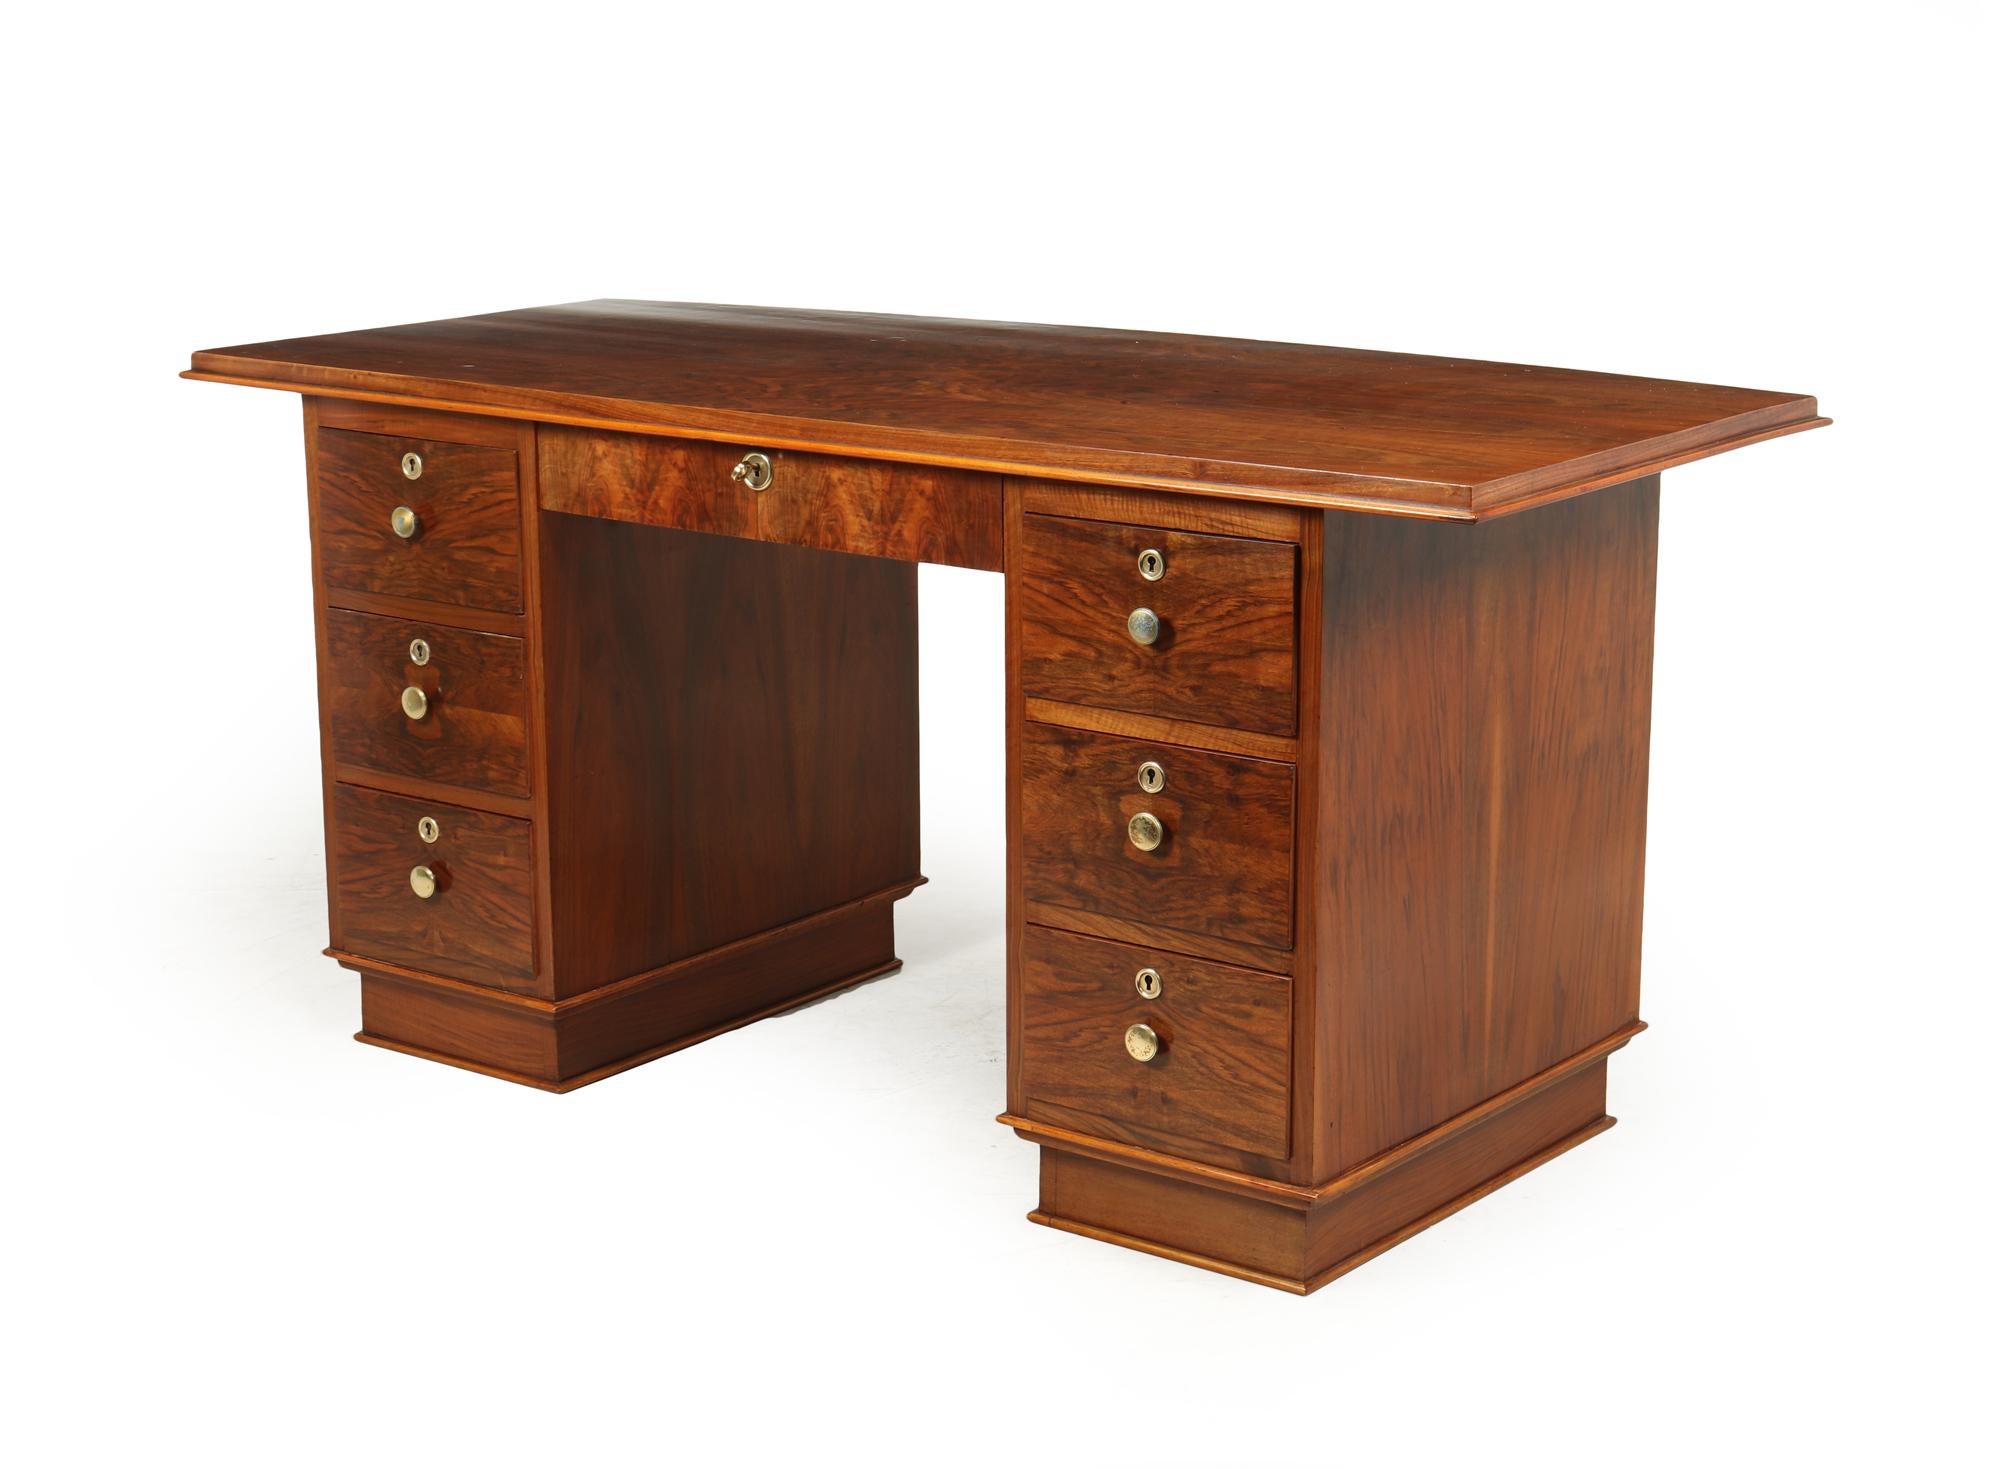 A seven drawer desk produced in France in the 1930’s it has two pedestals a central drawer and a large overhanging curved top. The desk has been fully restored and polished by hand alto there is still some minor indentations to the top

Age: